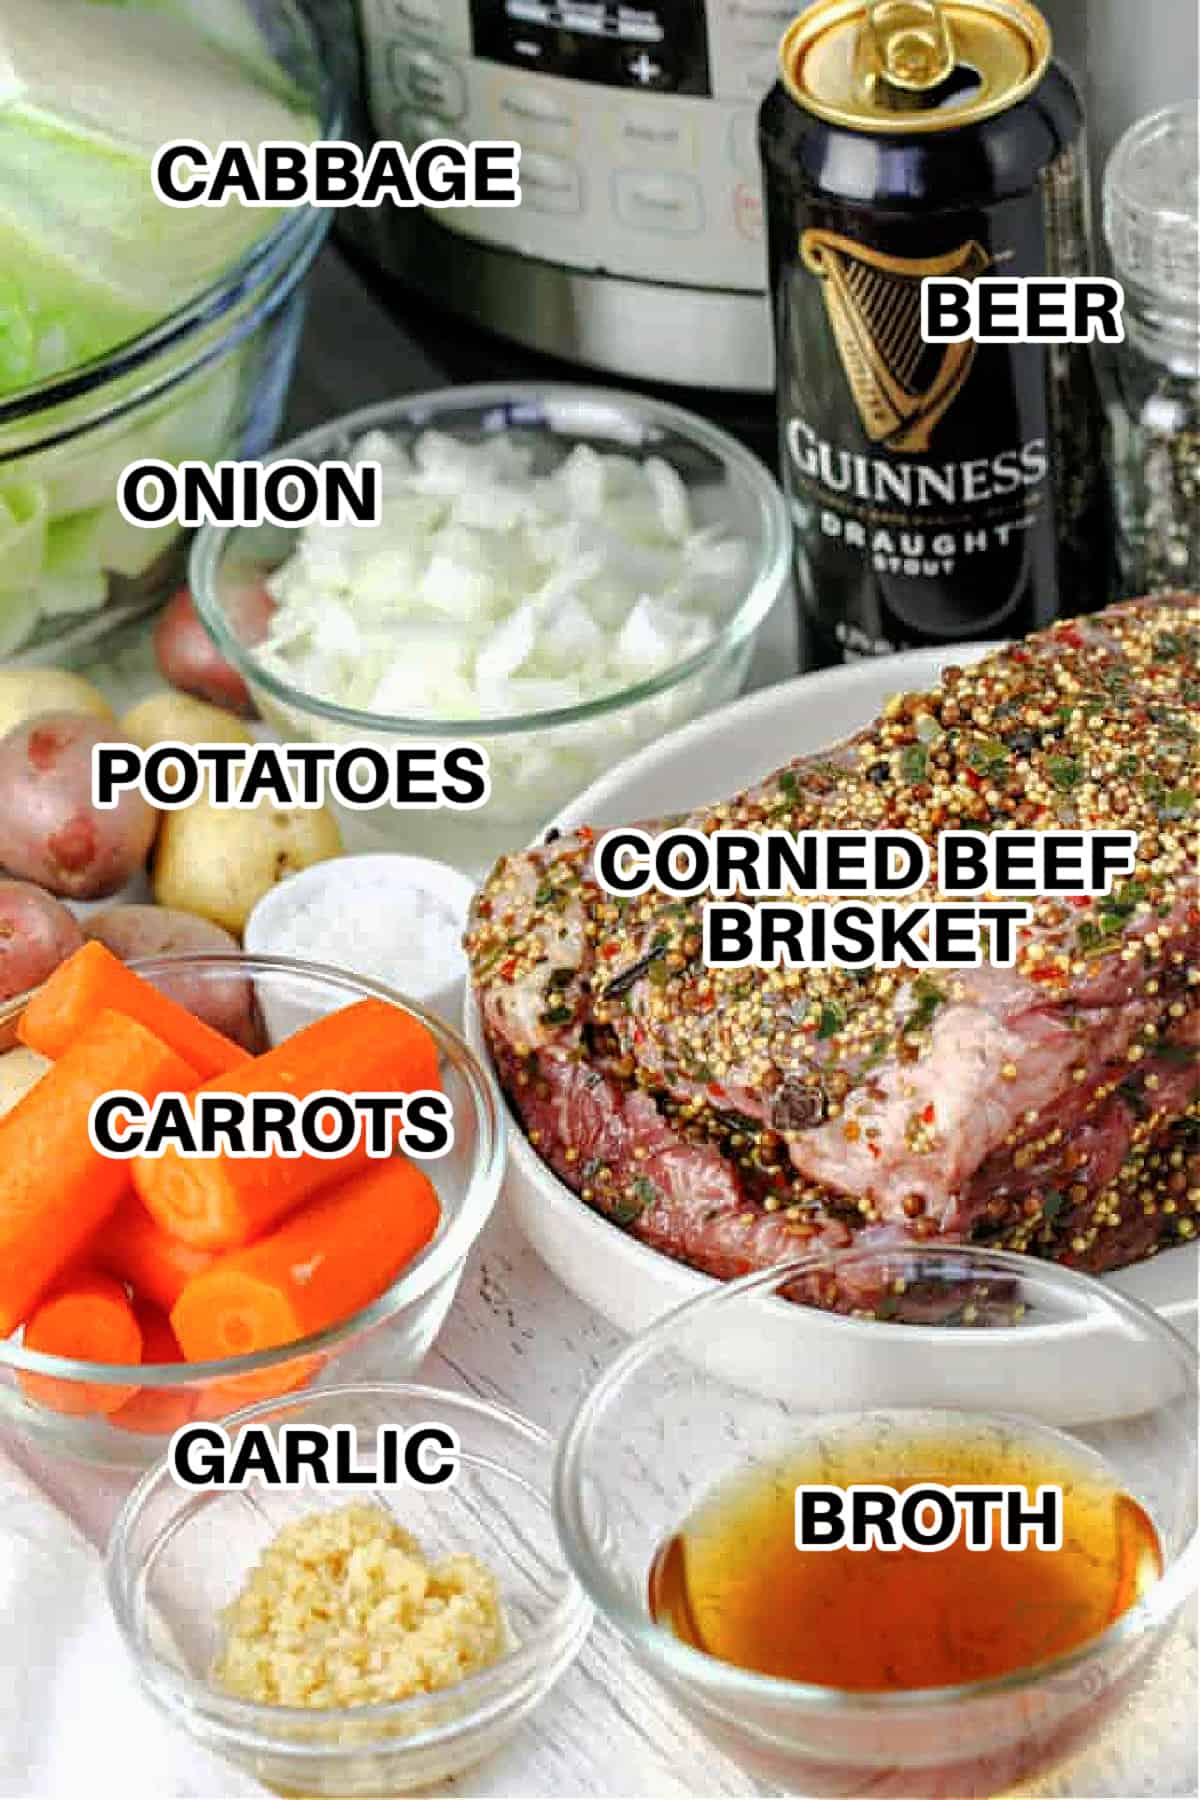 labeled ingredients such as corned beef brisket, beer, broth, minced garlic, carrots, potatoes, cabbage and onions assembled to make Instant Pot corned beef and cabbage recipe